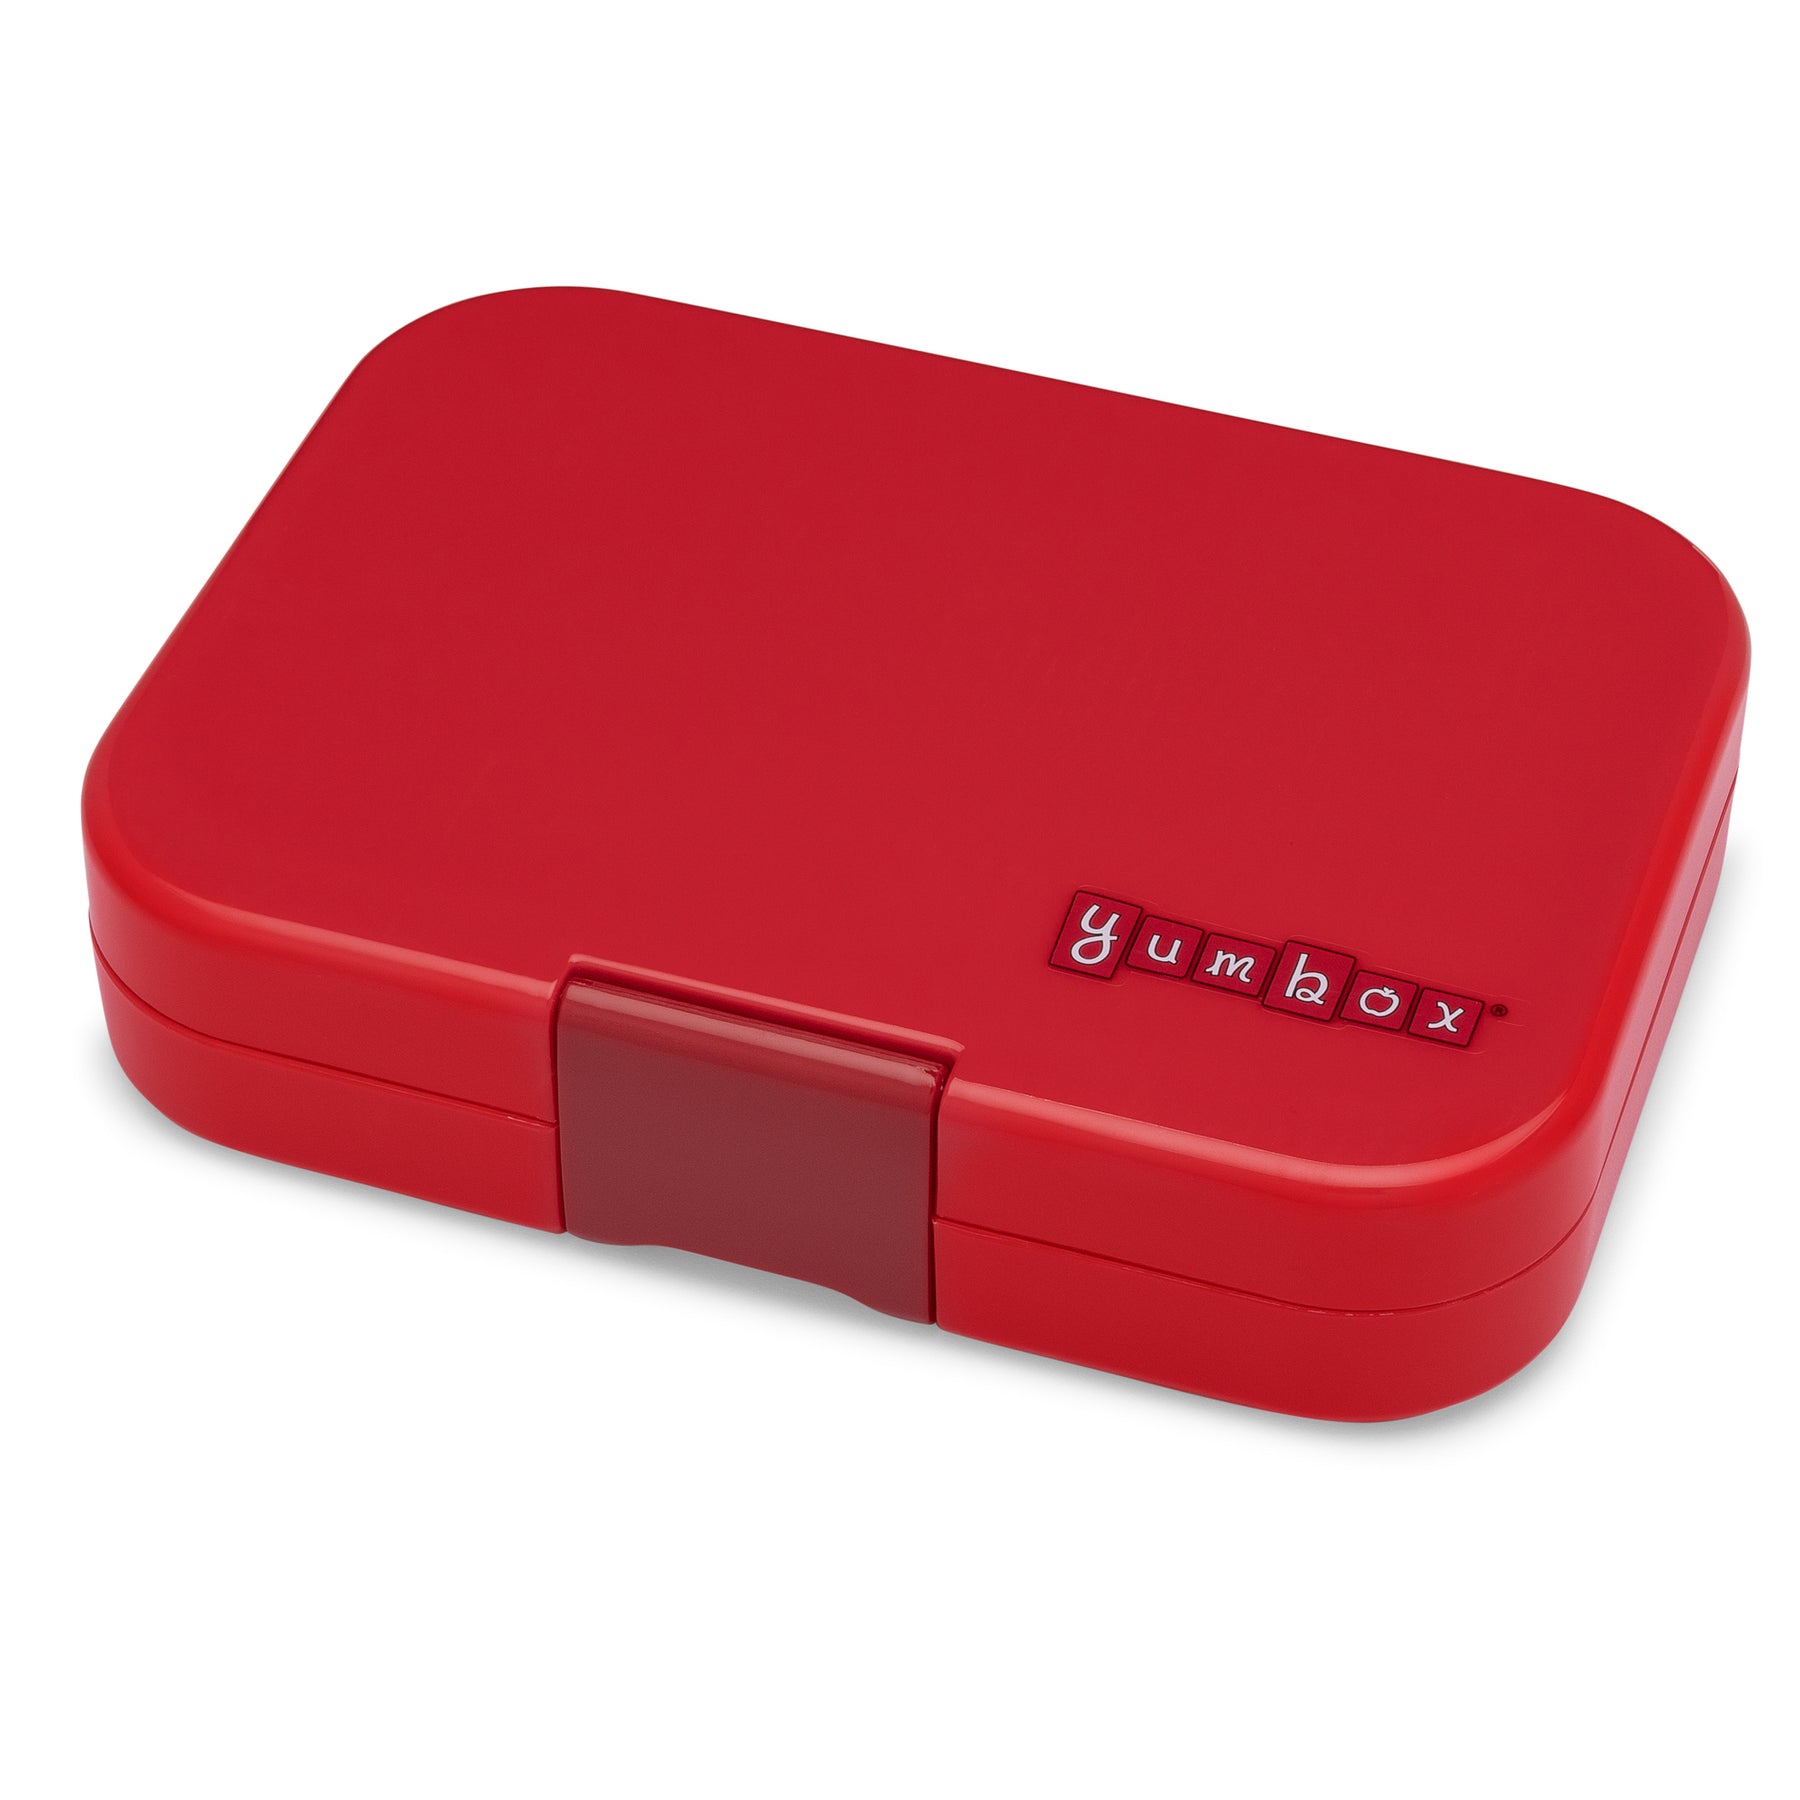 Yumbox – Panino – Wow Red avec plateau requin (4 compartiments)    - Yumbox - Boîte à repas - 